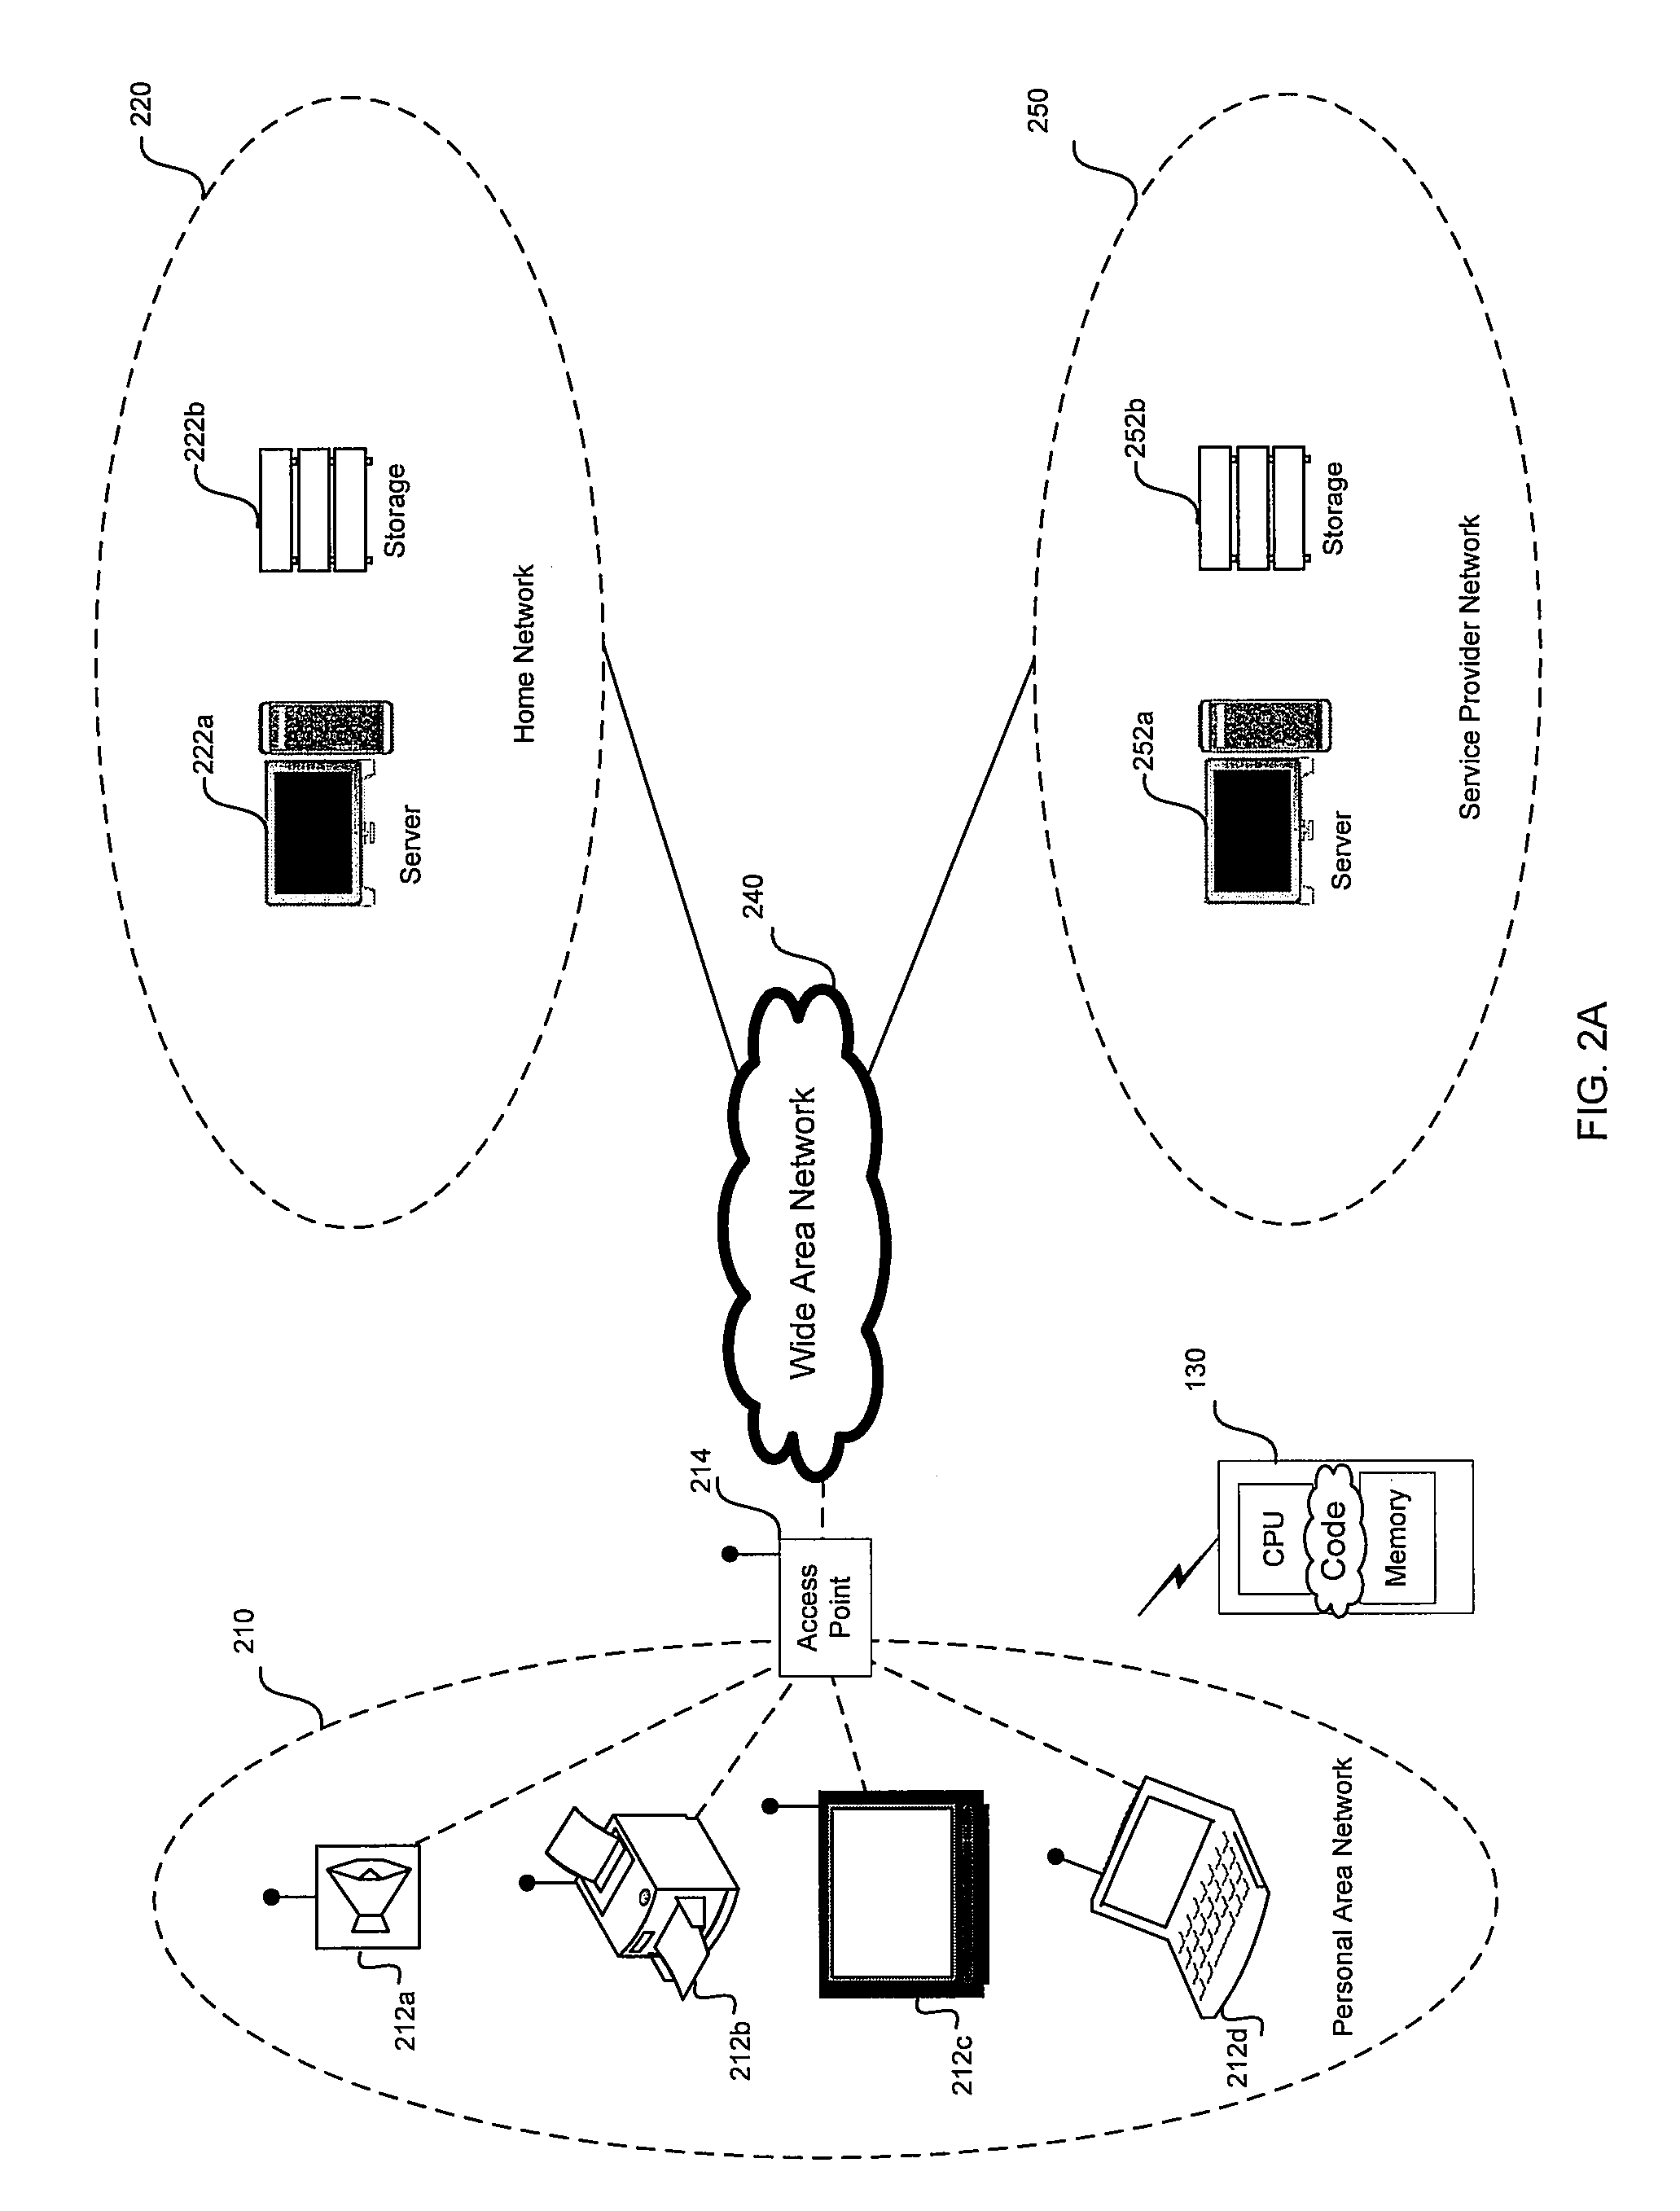 Method And System For Enabling Rendering Of Electronic Media Content Via A Secure Ad Hoc Network Configuration Utilizing A Handheld Wireless Communication Device